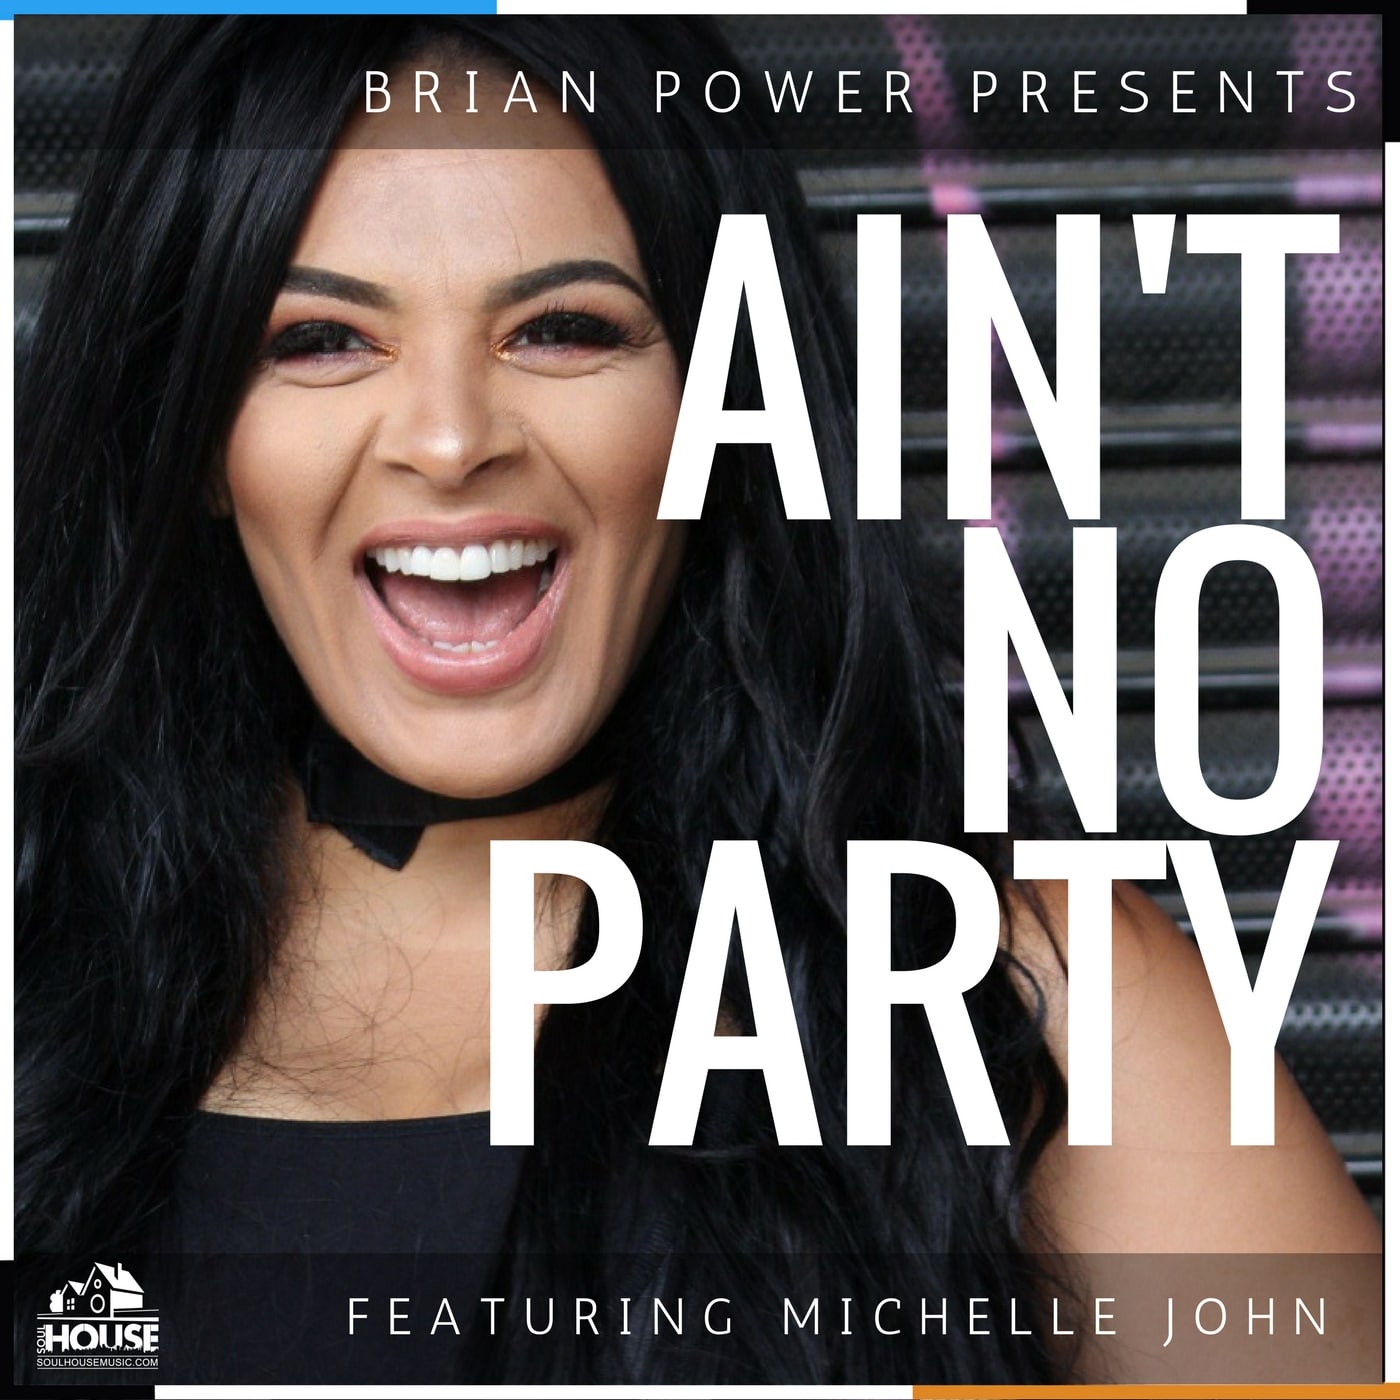 Brian Power Presents; Ain't No Party Featuring Michelle John